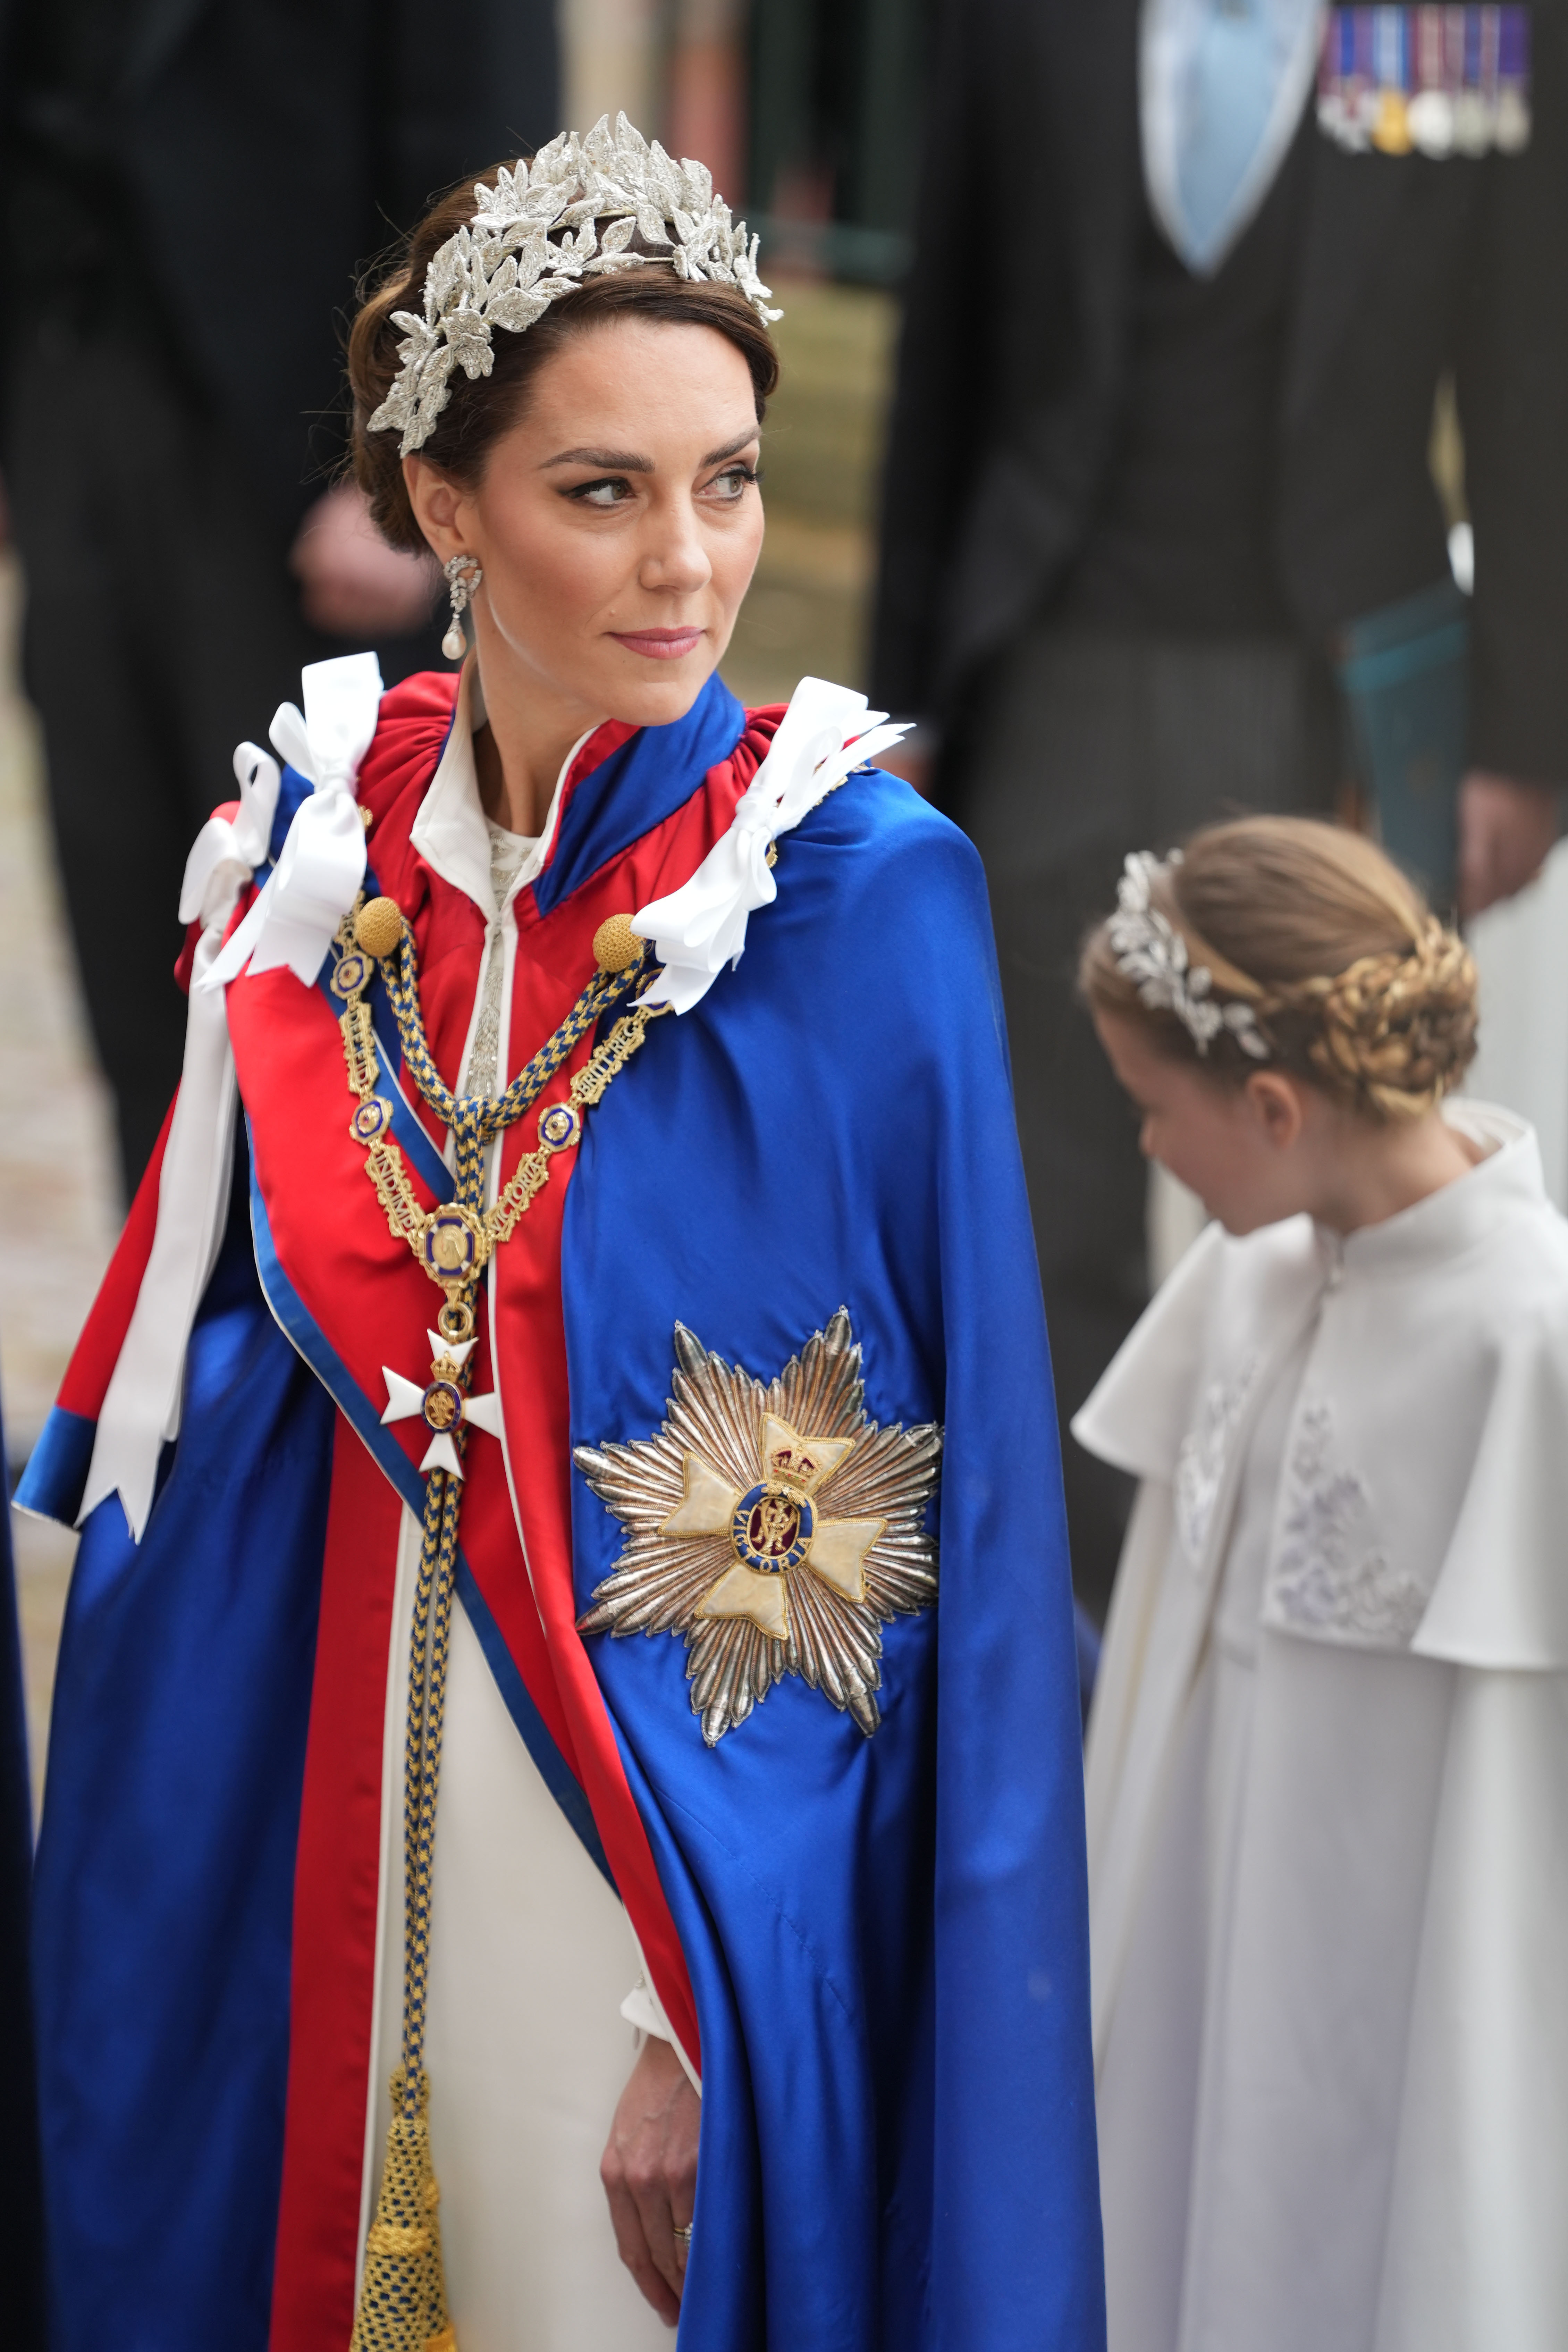 Princess of Wales, Kate Middleton at the Coronation of King Charles III in London in 2023 | Source: Getty Images